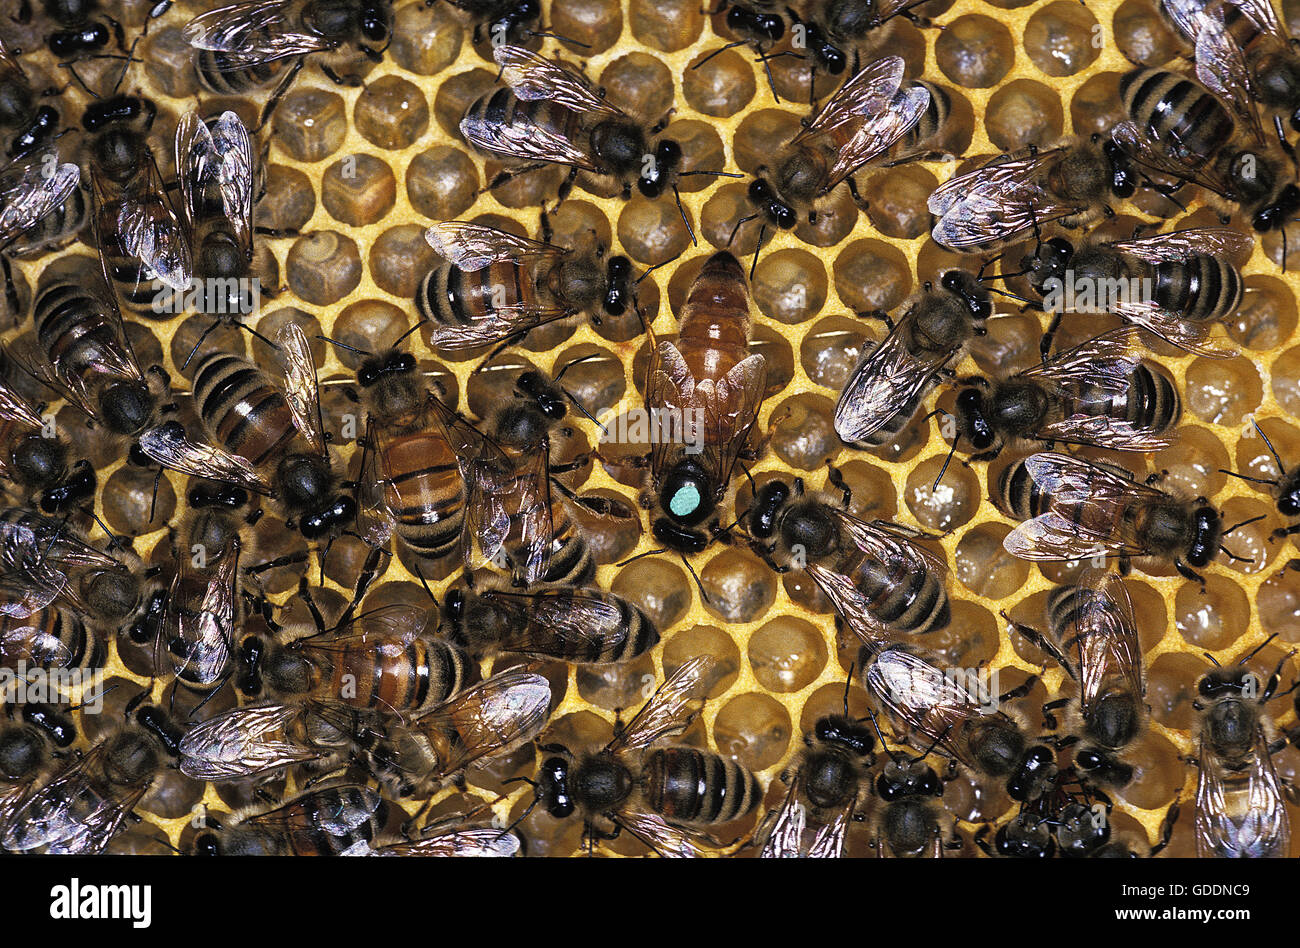 Honey Bee, apis mellifera, Hive with Queen in the Middle Stock Photo